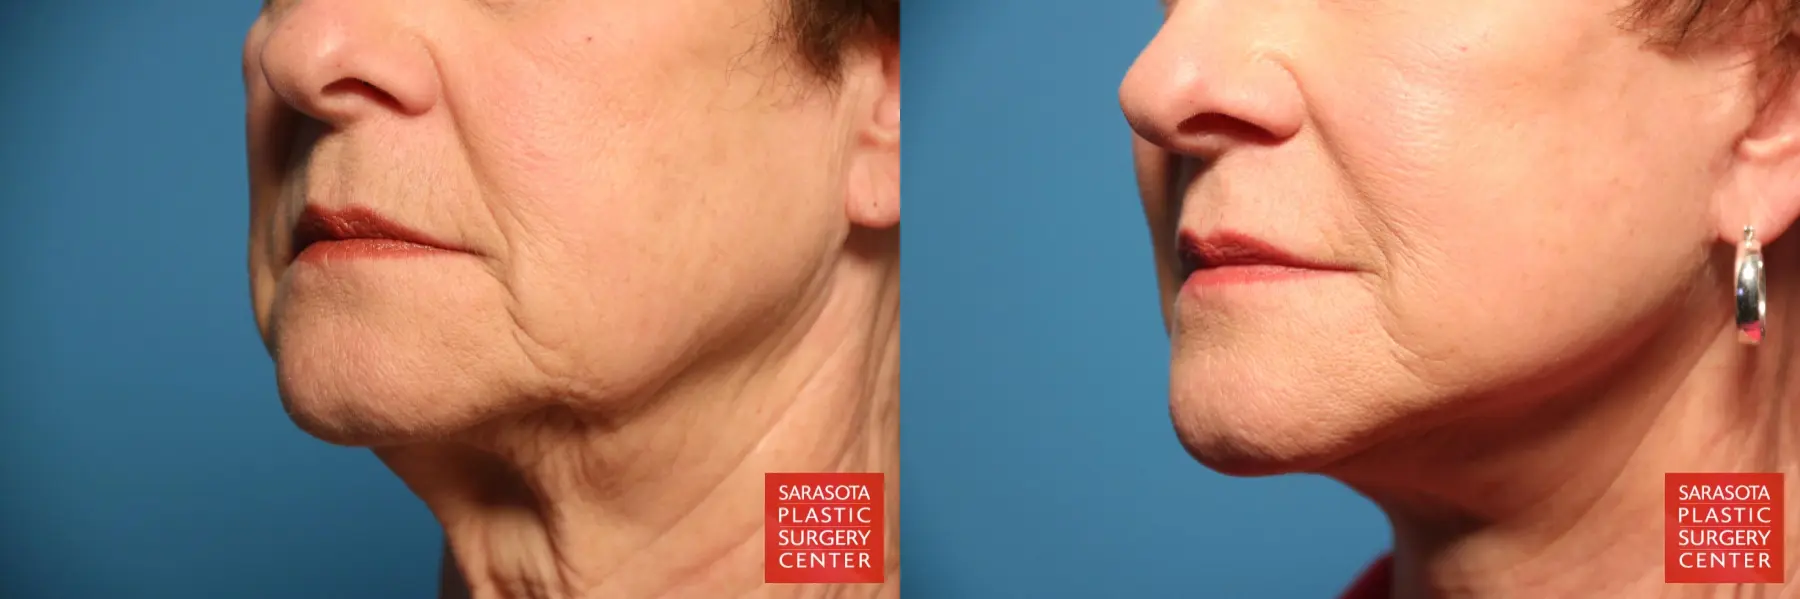 Fillers: Patient 2 - Before and After 3